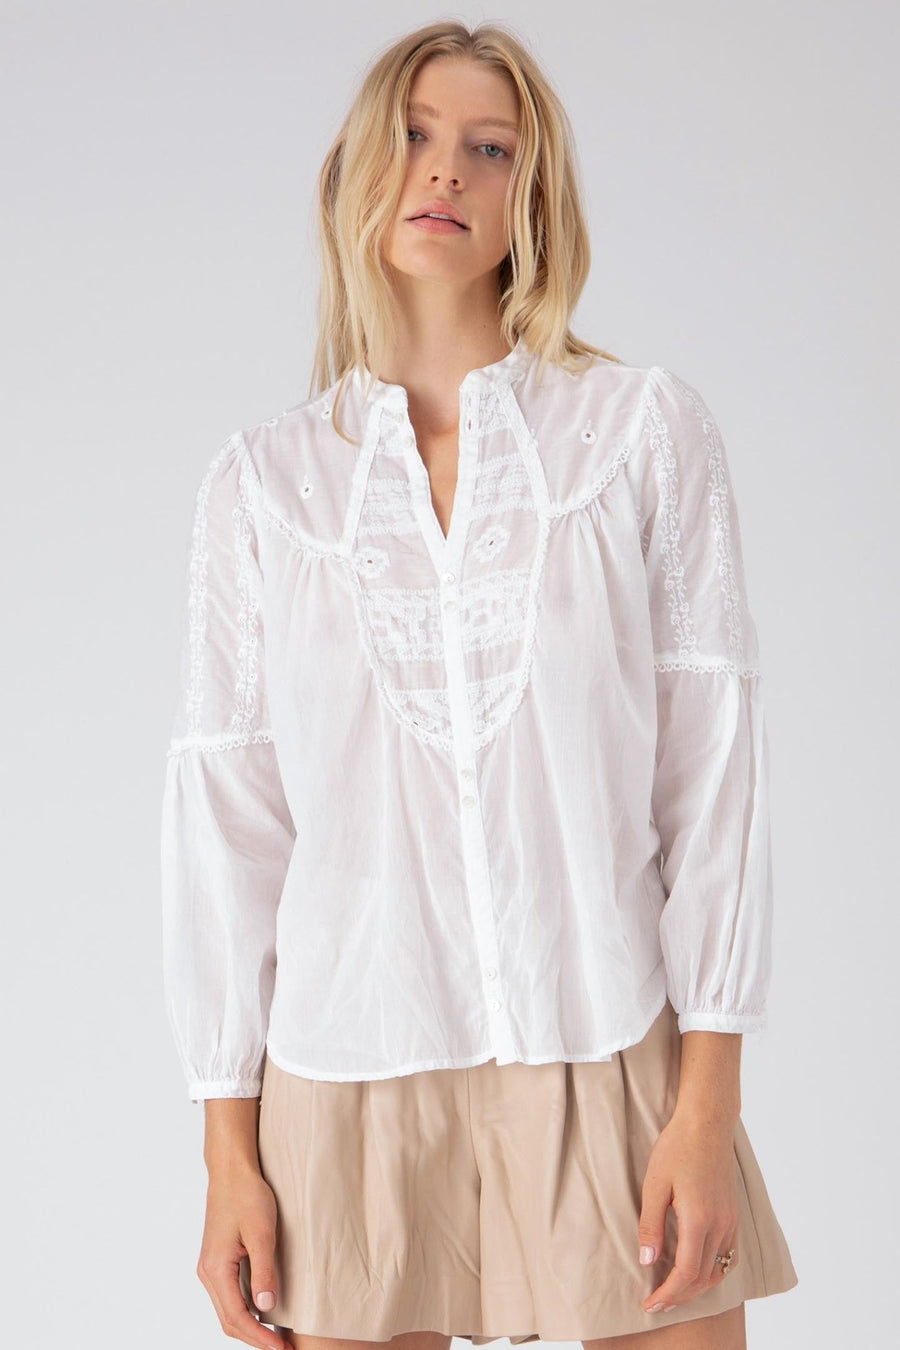 ATHENA LONG SLEEVE TOP, WHITE - Burning Torch Online Boutique